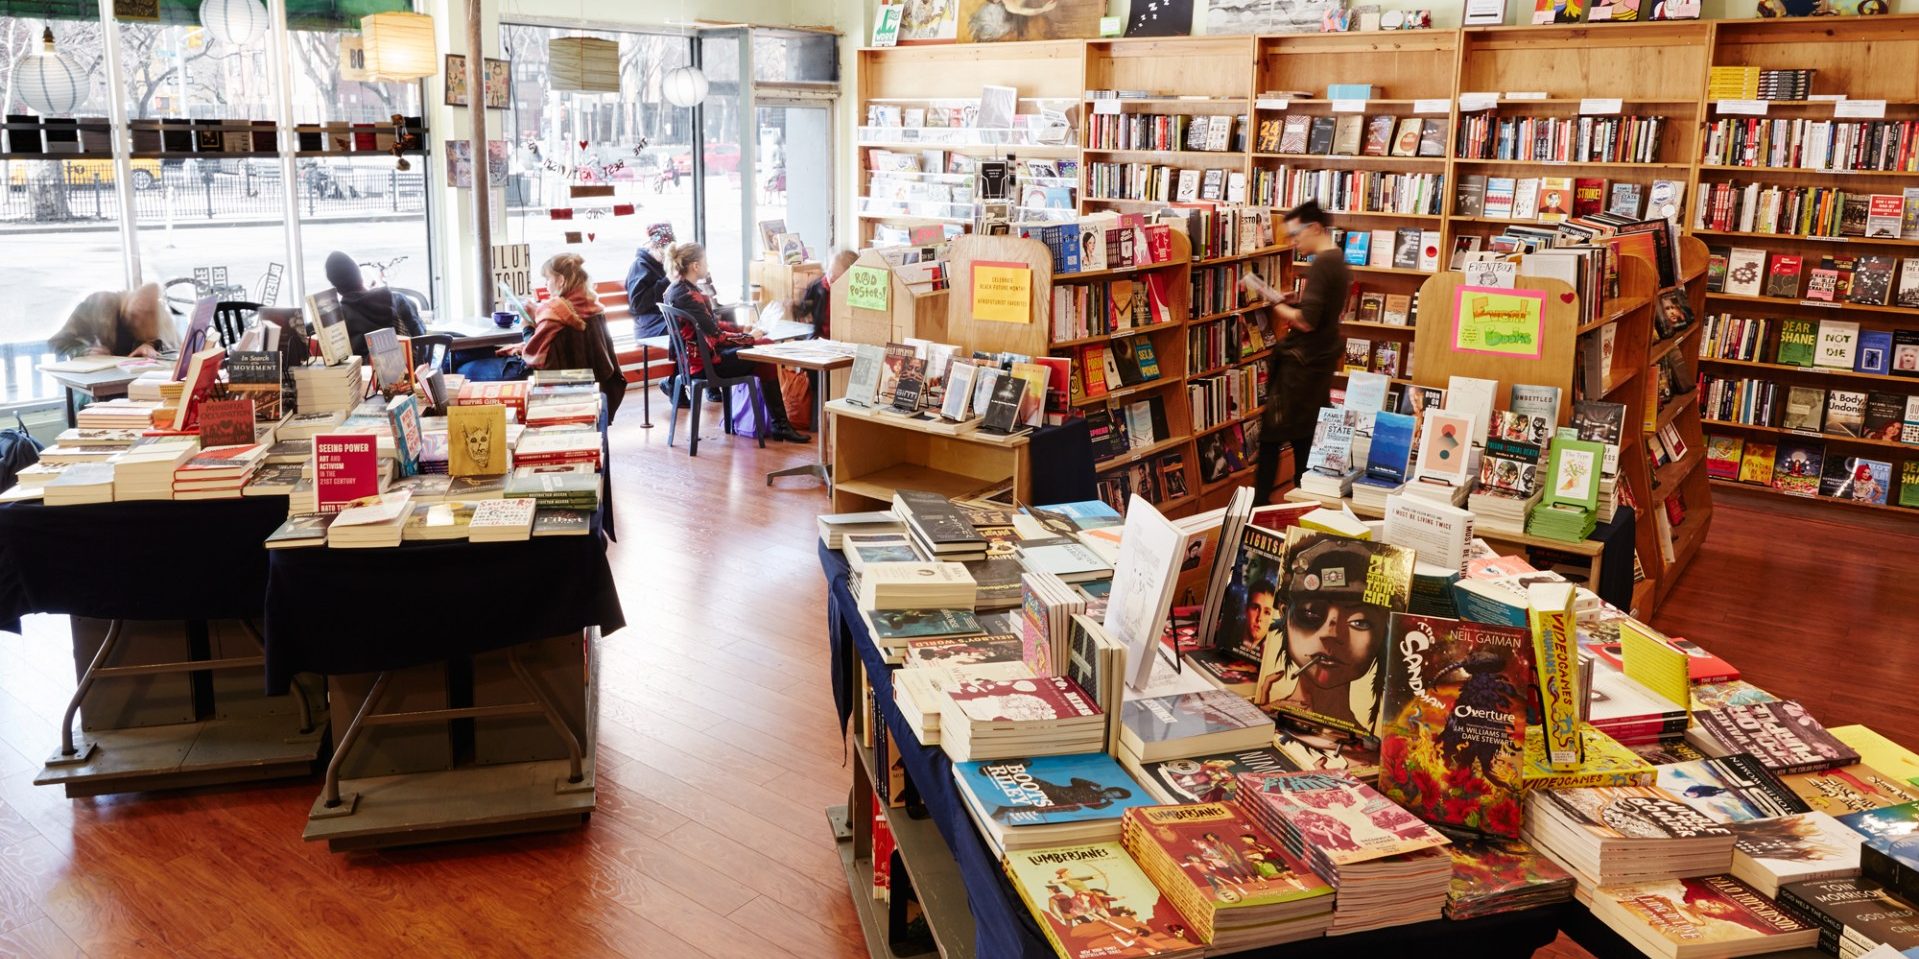 A wide angle photo of the inside of Bluestockings bookstore and activist center.